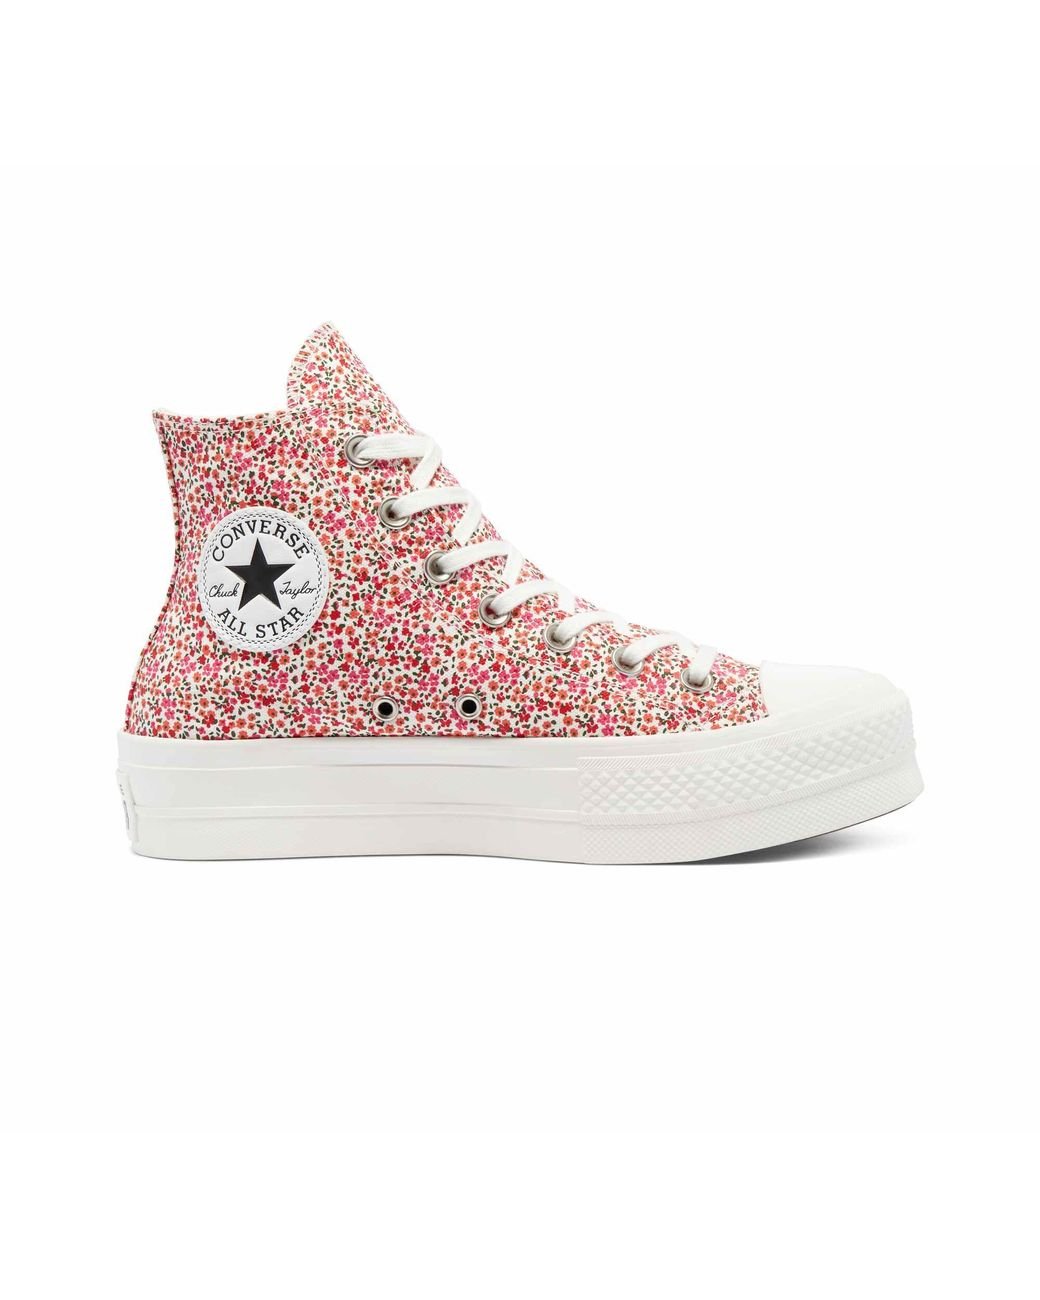 Converse Vintage Floral Platform Chuck Taylor All Star in White | Lyst